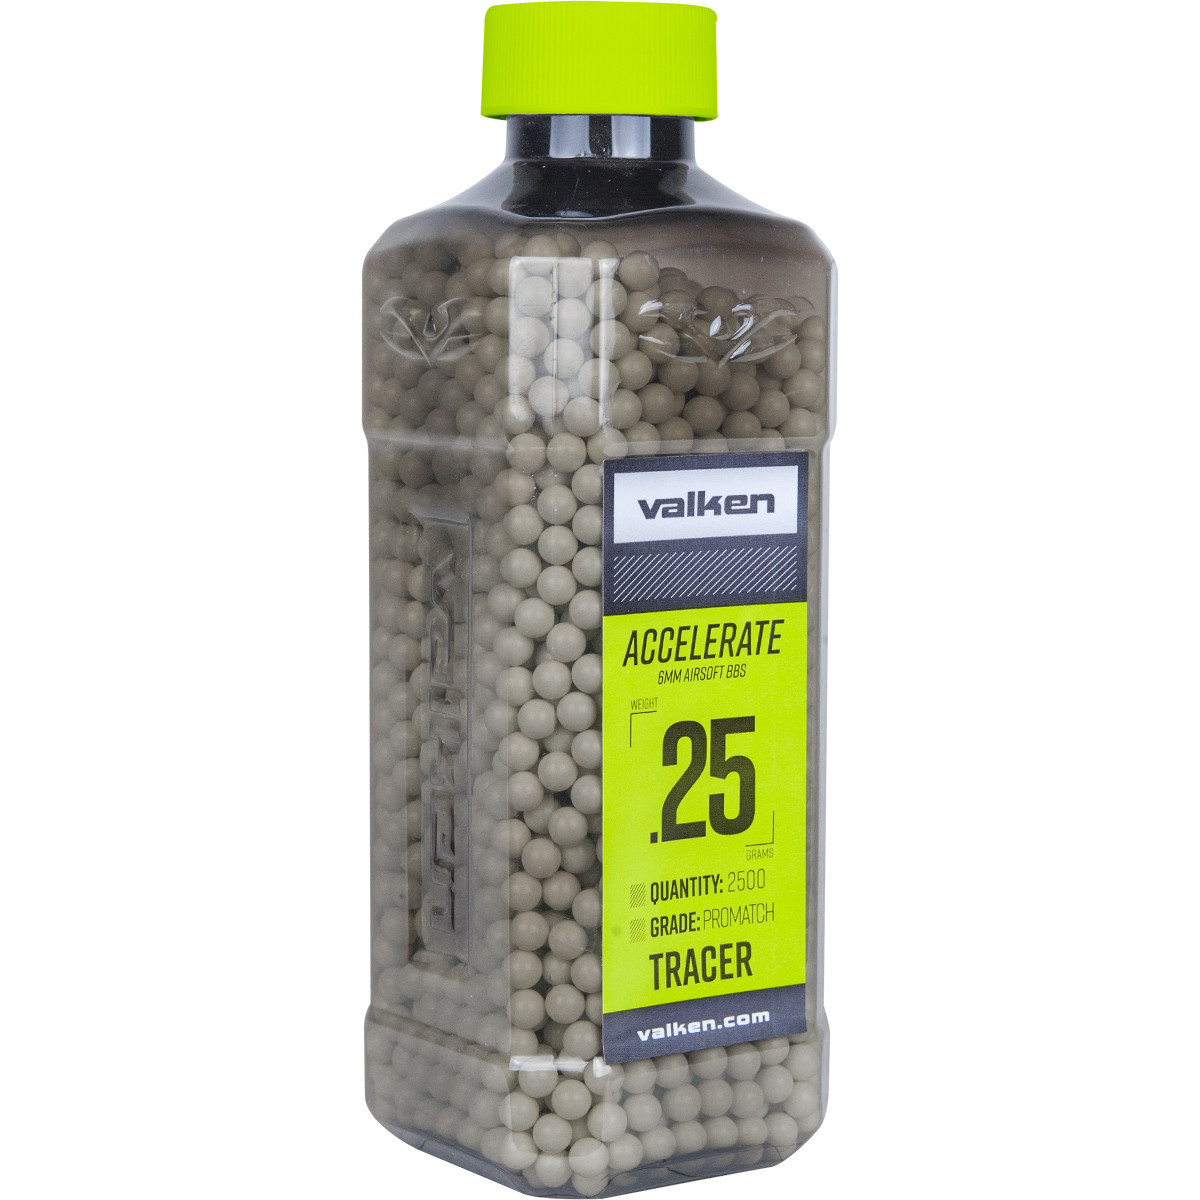 Valken - Airsoft BBs - ACCELERATE 0.25g - 2500st - Tracer